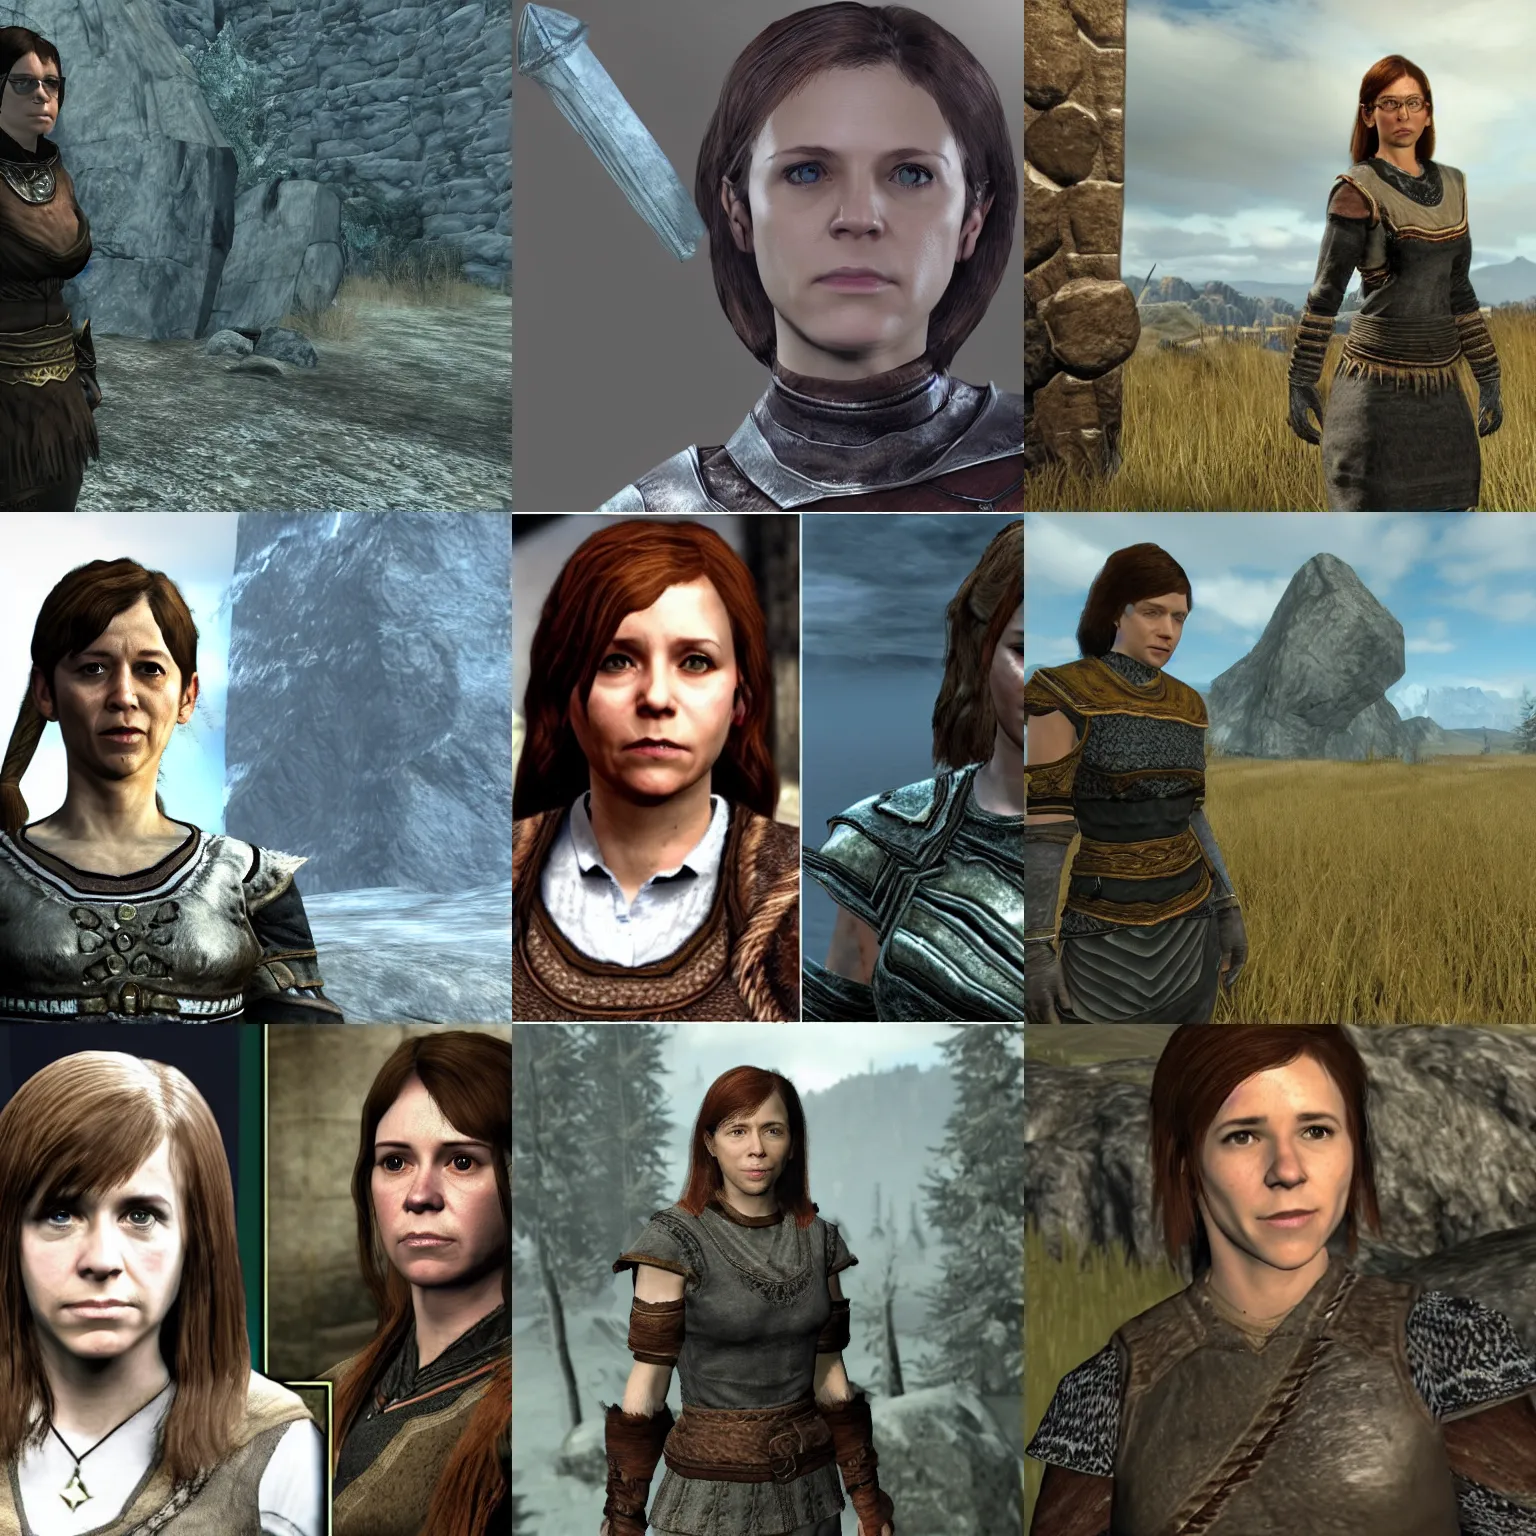 Prompt: female asa Butterfield mixed with pam beesly as a character in Skyrim